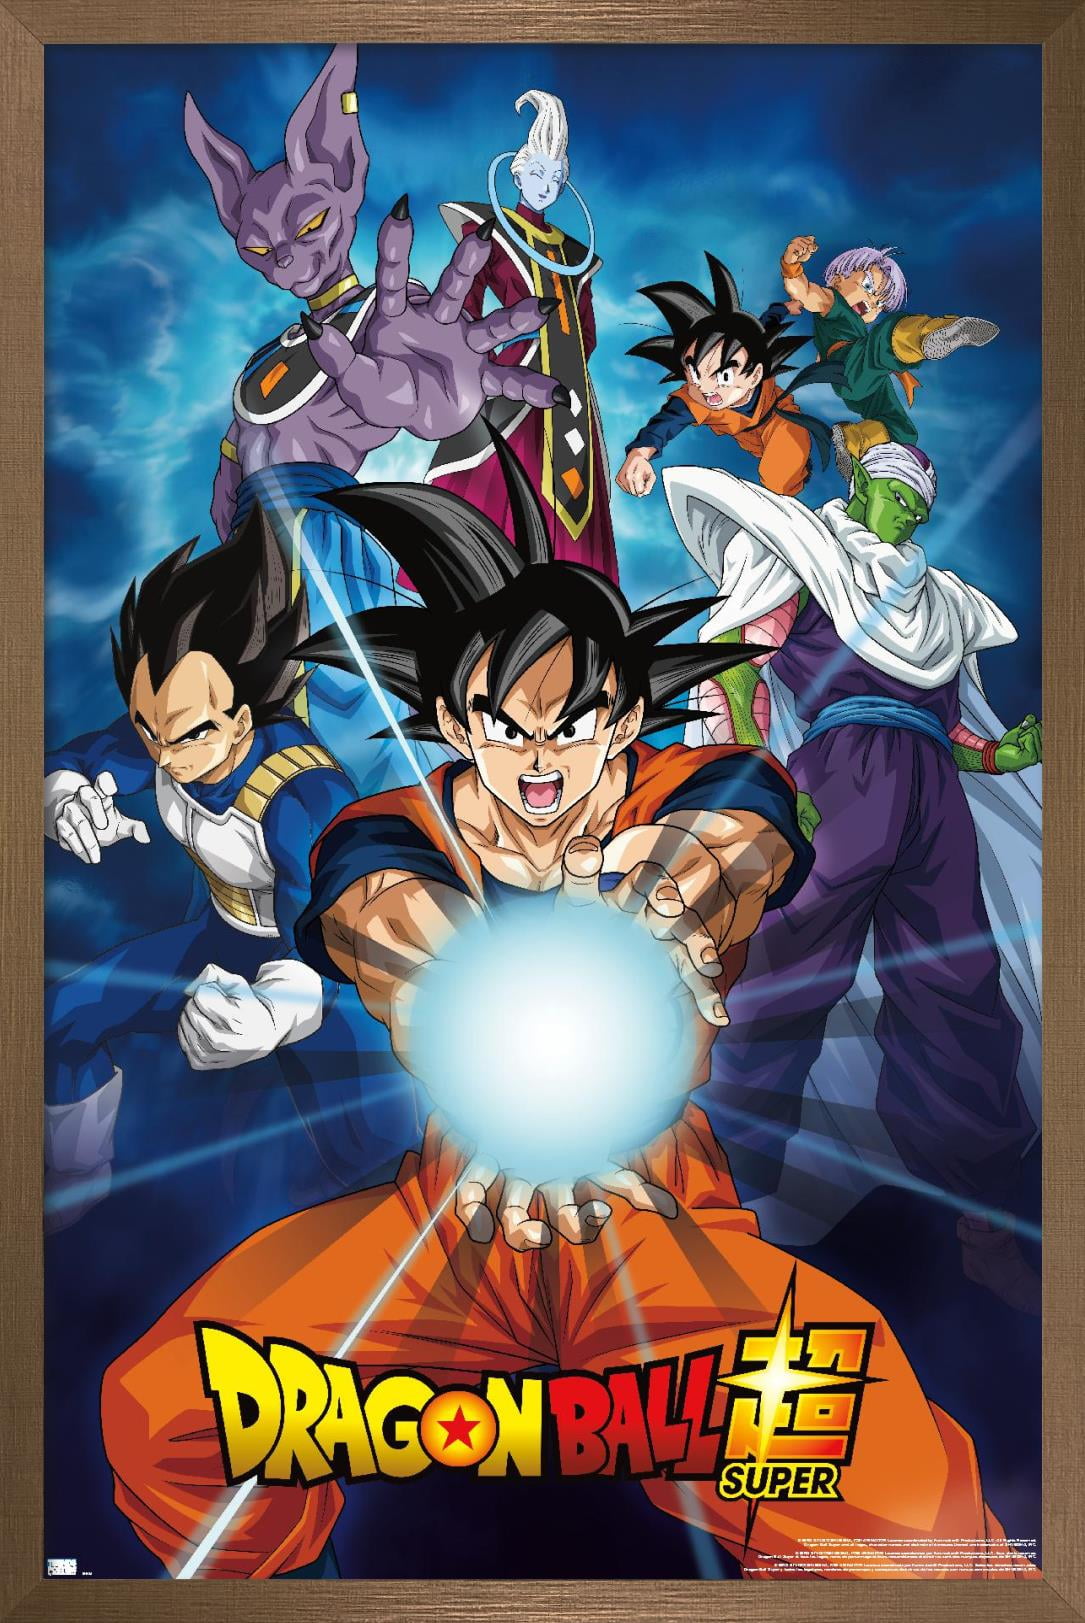 Dragon Ball Super - Groups Wall Poster, 14.725 x 22.375, Framed